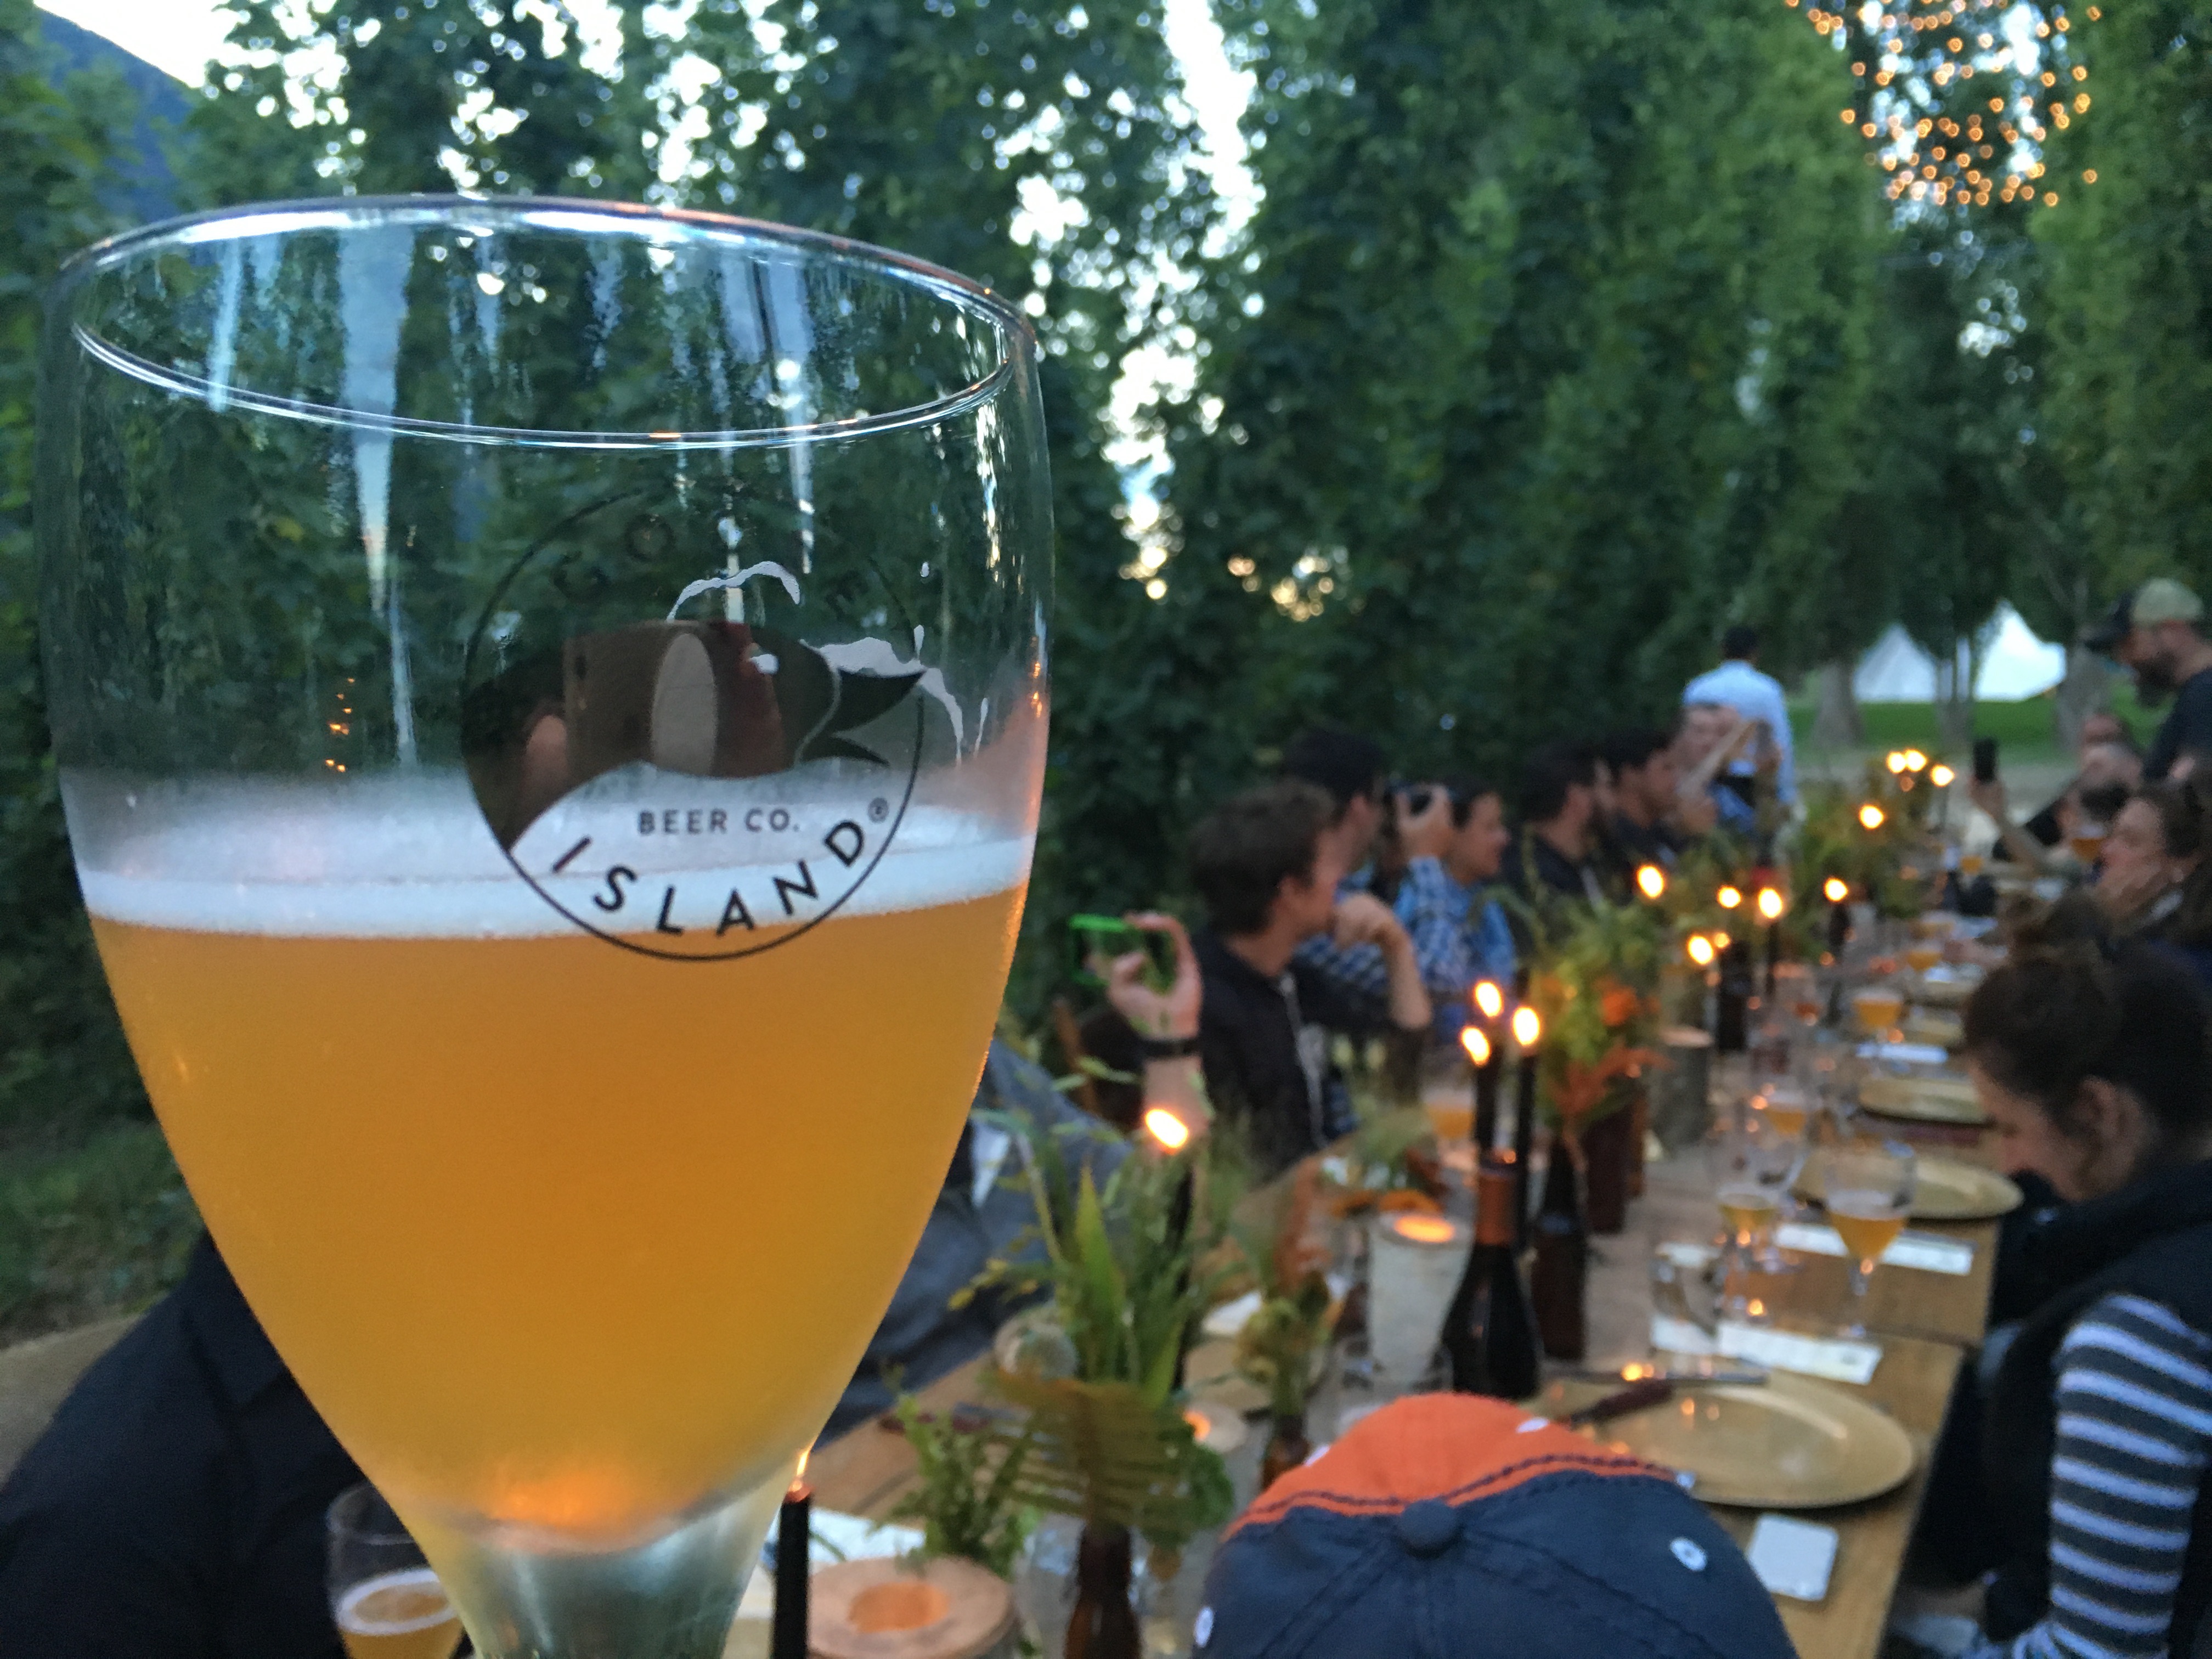 A glass of Goose Island during the Farewell Beer Dinner at Elk Mountain Farms.